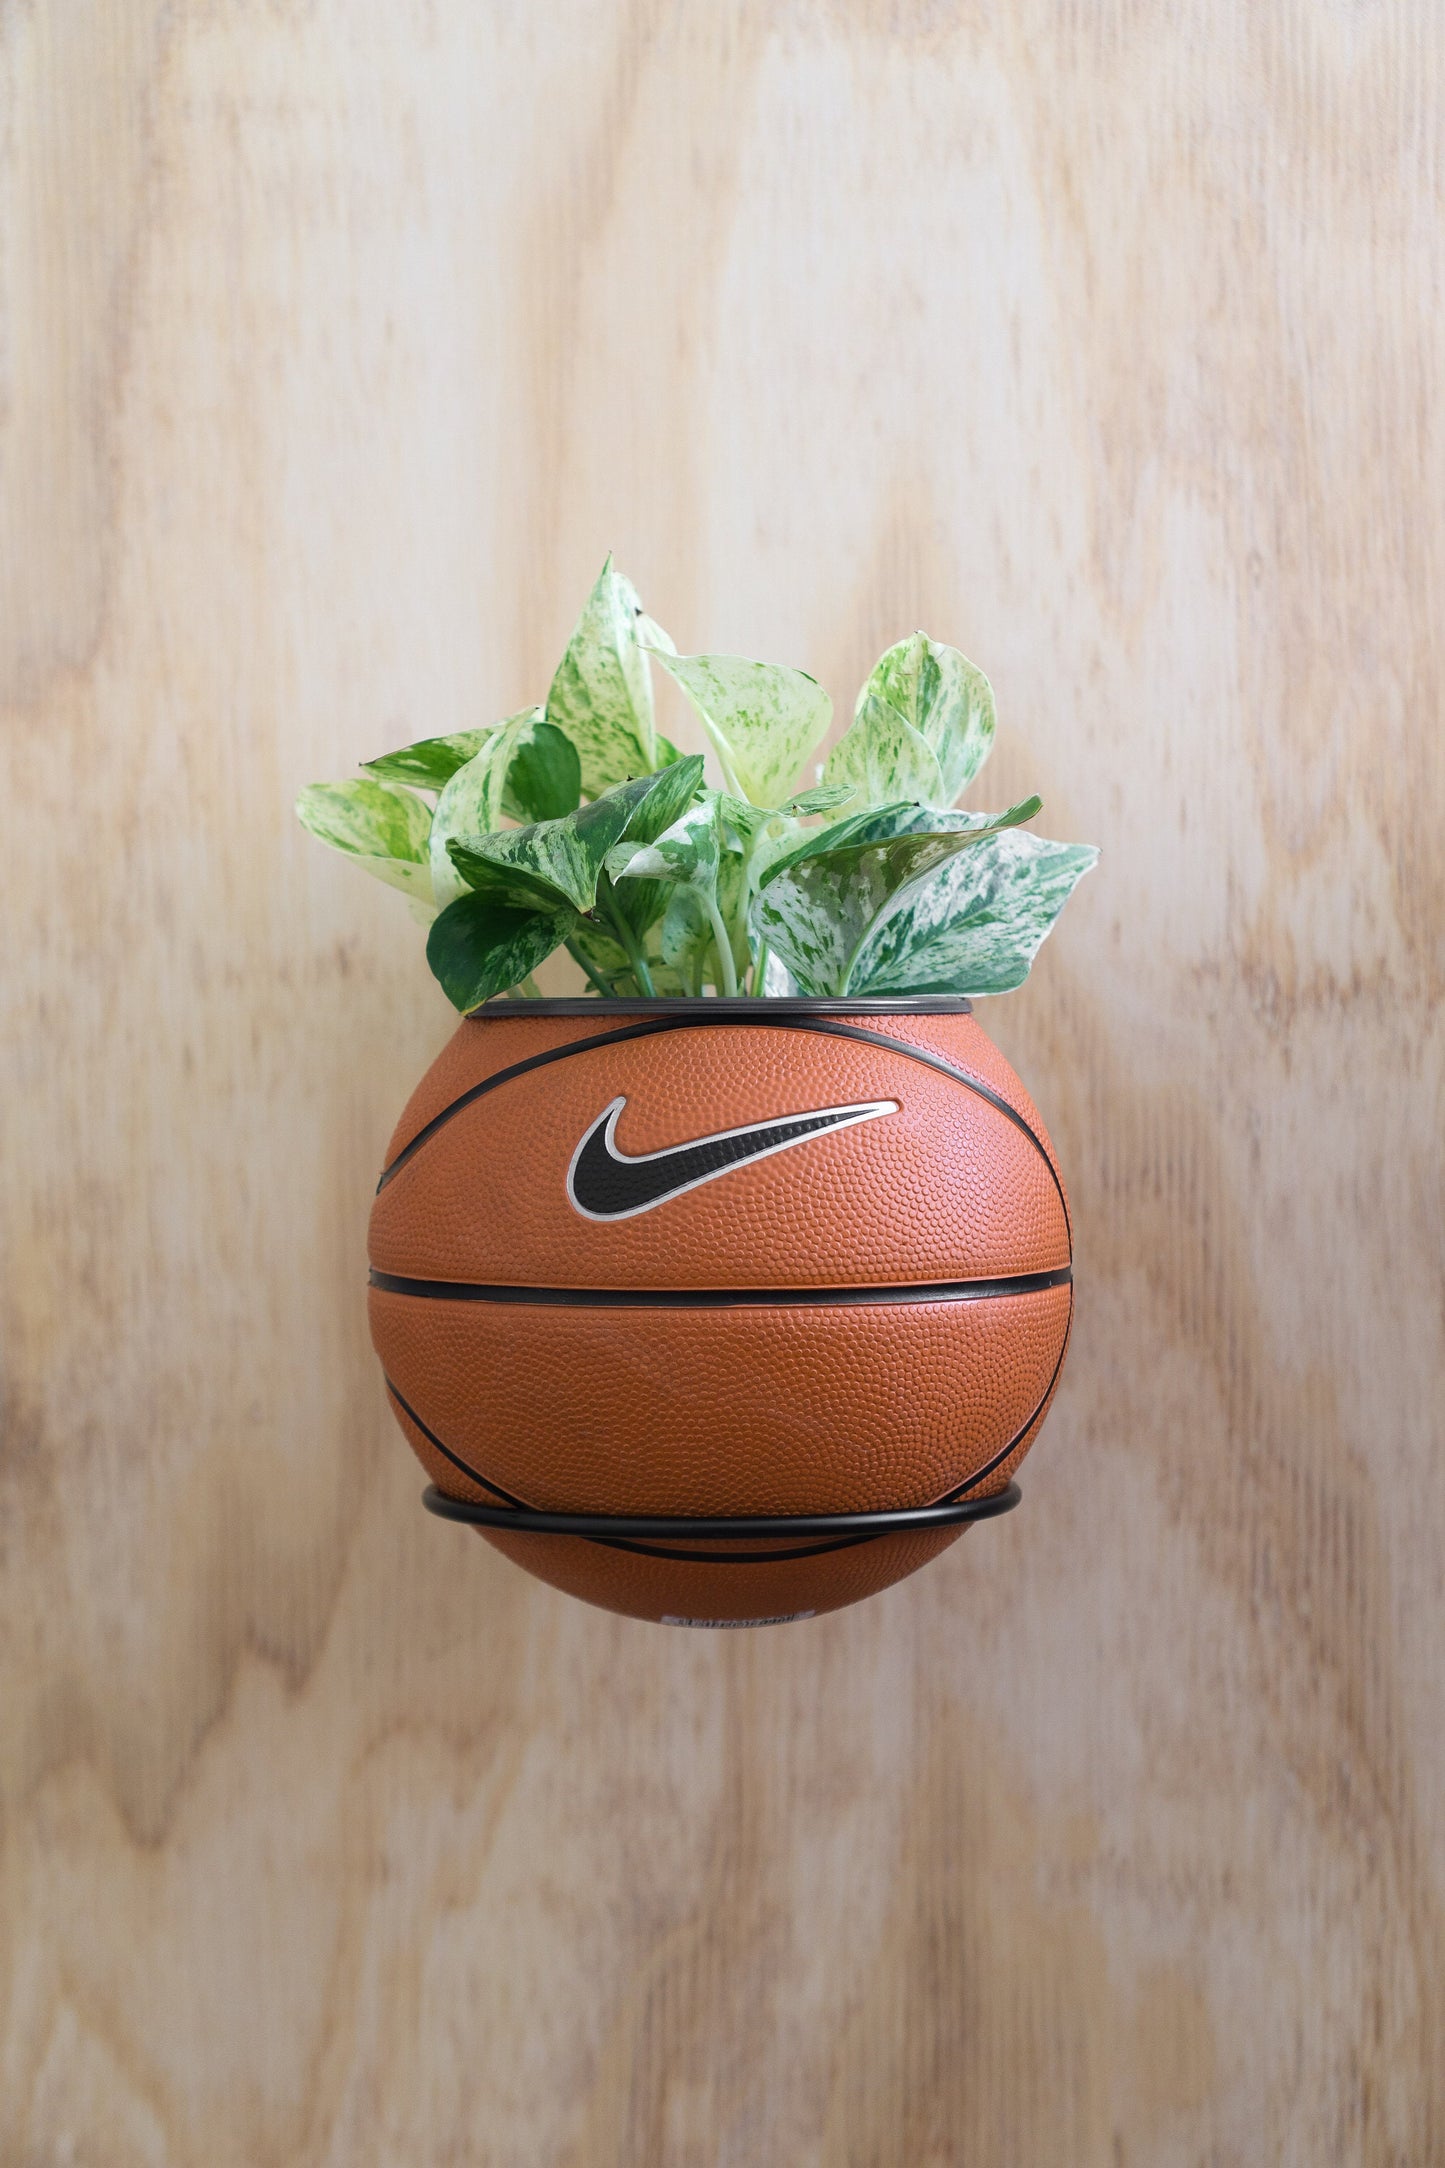 plntrs - Nike RYGB colorful Swoosh Mini Basketball Planter - new ball with stand